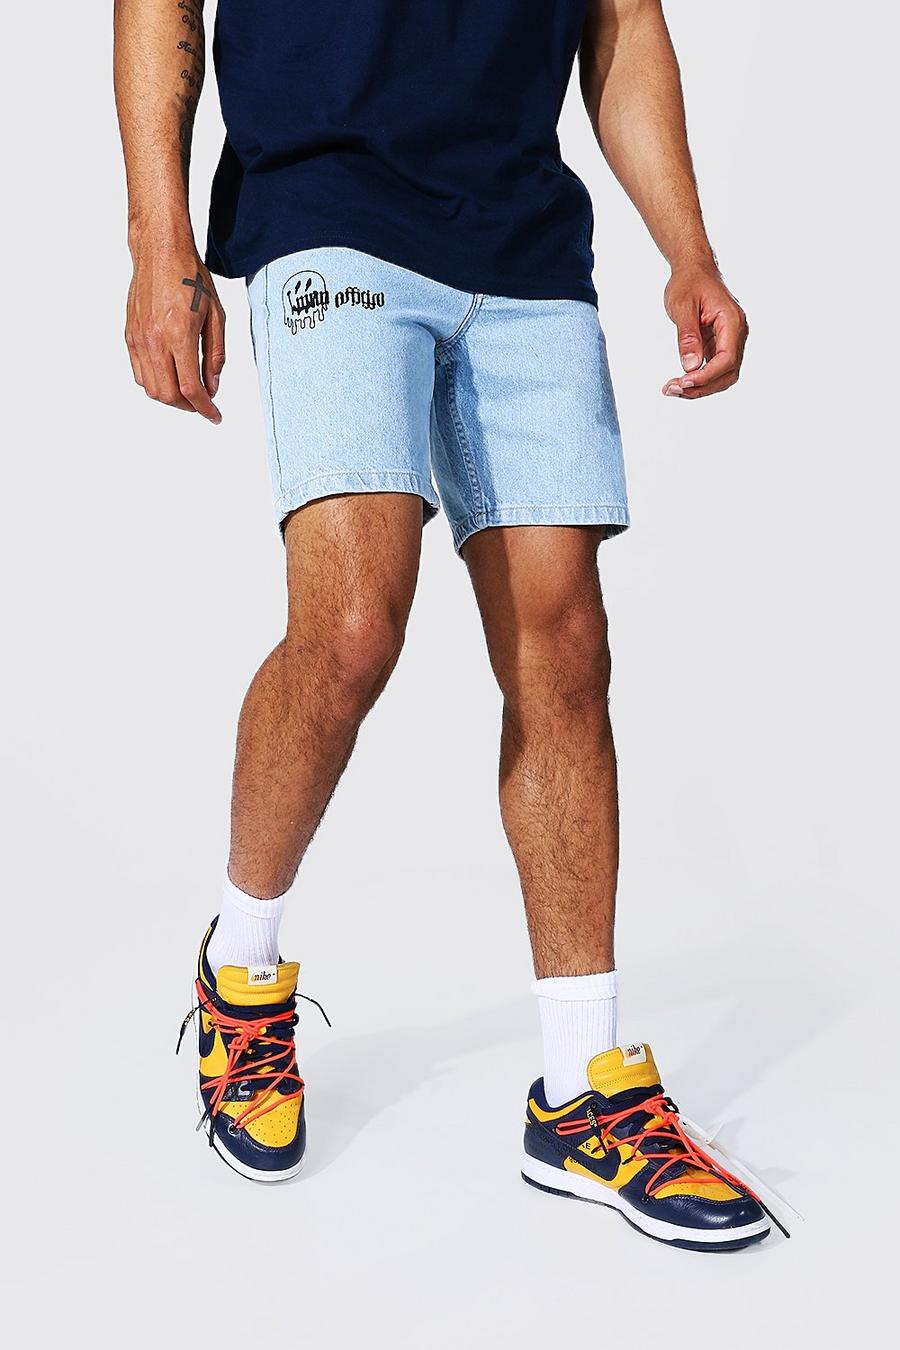 drippy shorts for guys